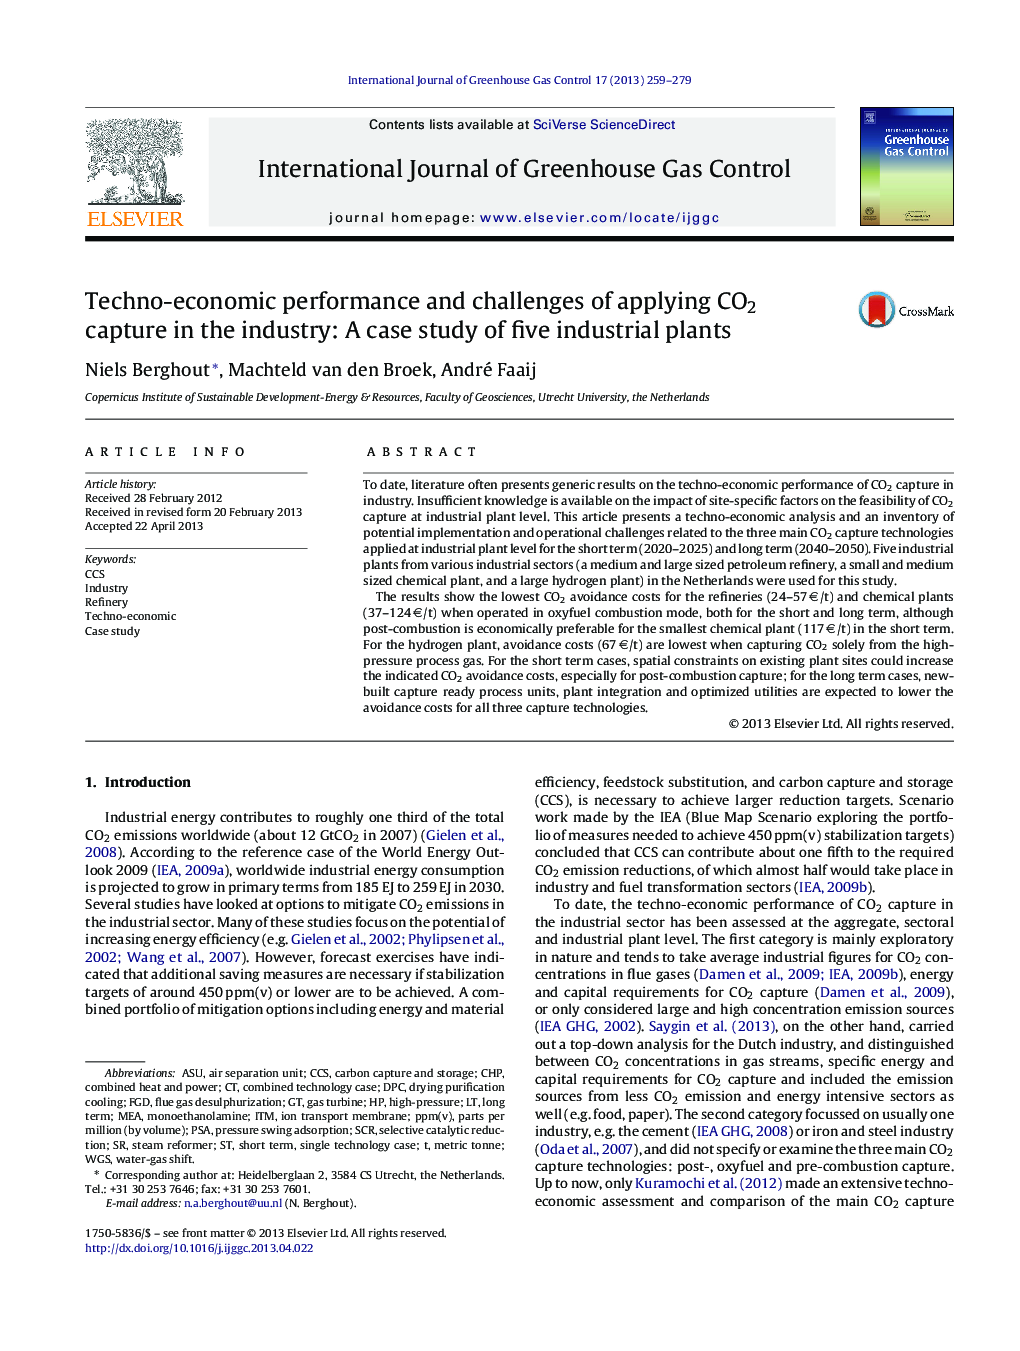 Techno-economic performance and challenges of applying CO2 capture in the industry: A case study of five industrial plants